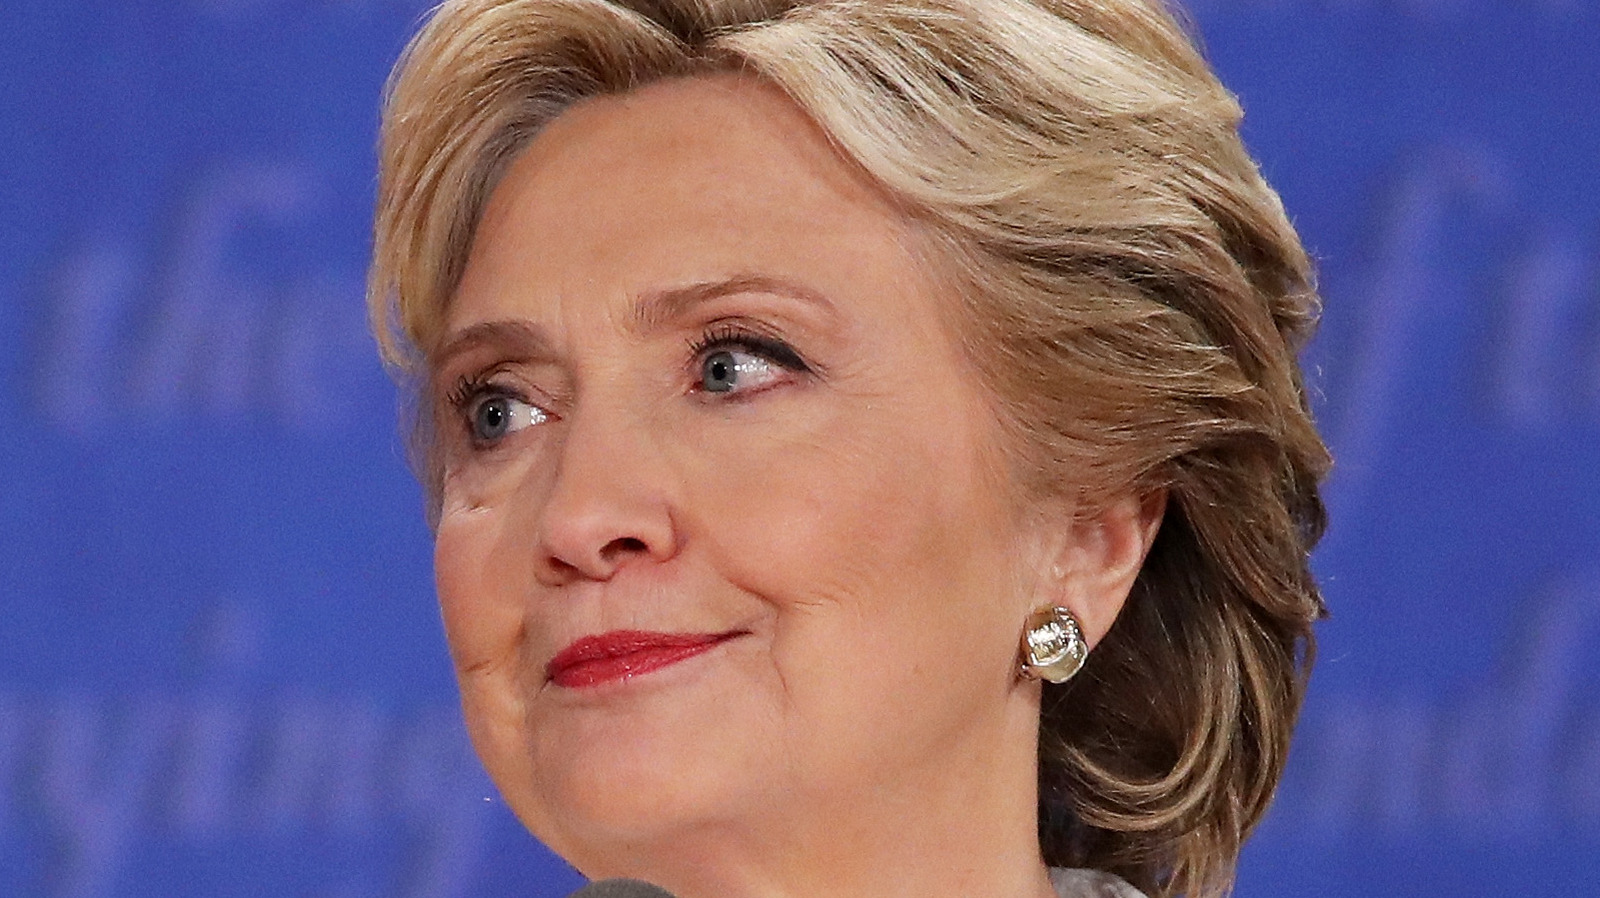 Expert S Take On Why Hillary Clinton Didn T Win In 2016 Has Twitter Divided